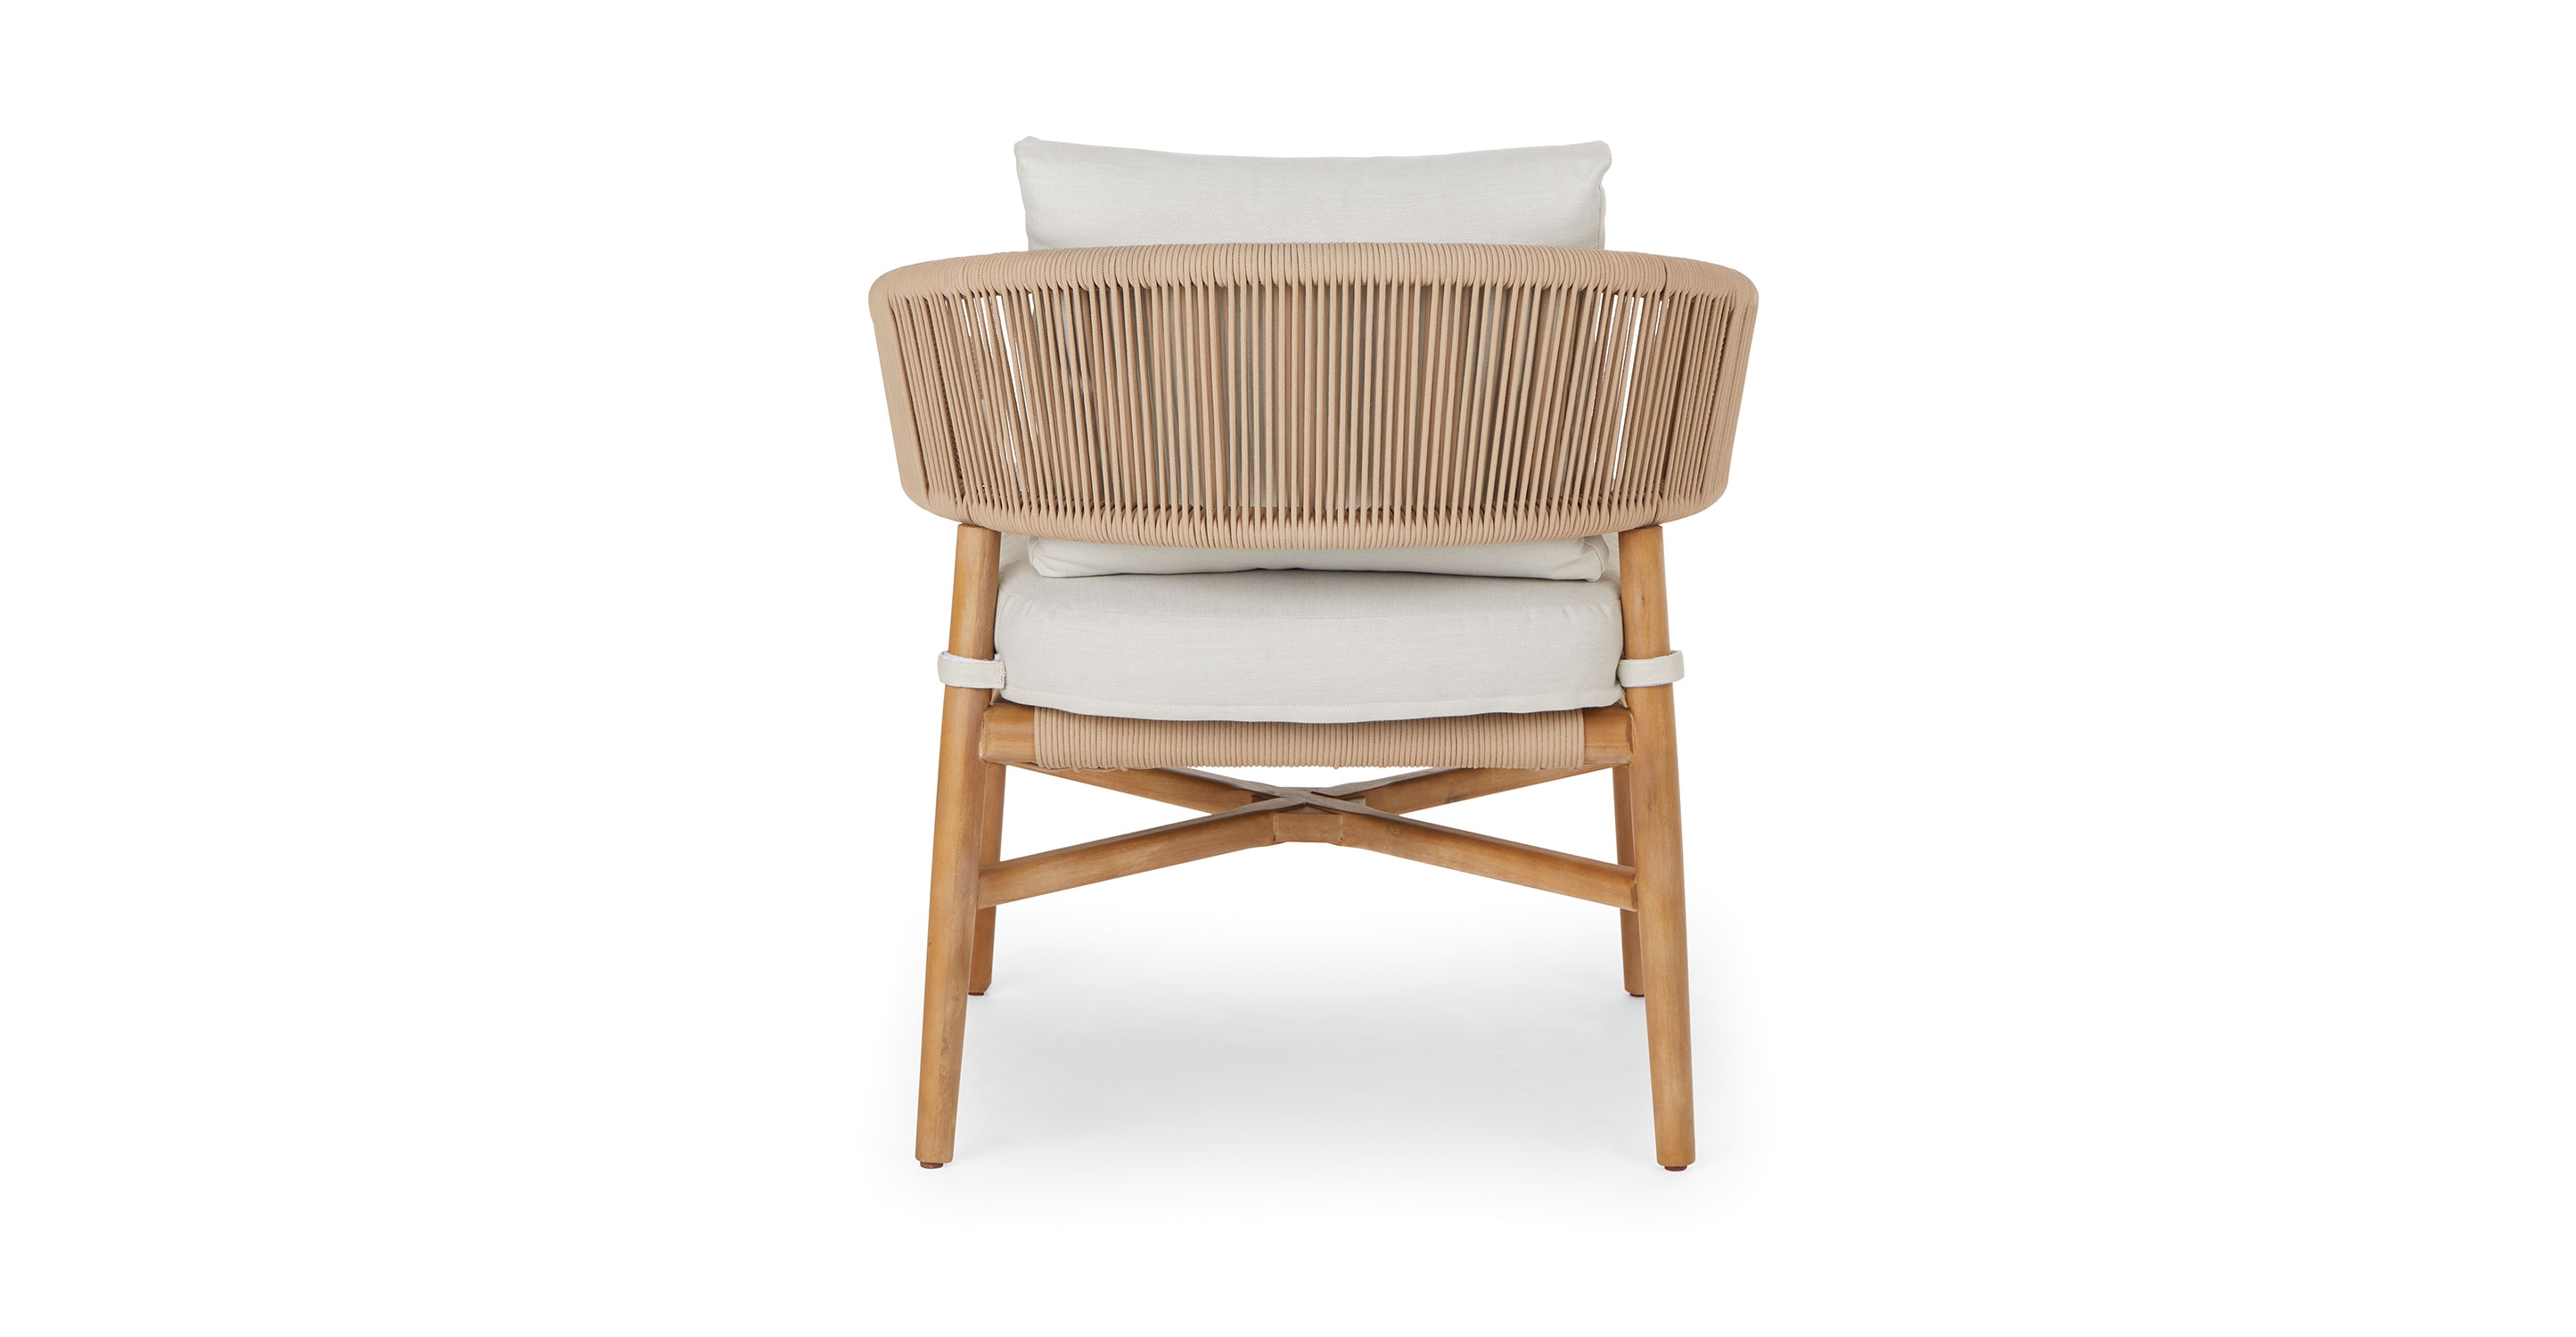 Makali Lounge Chair, Lily White - Image 4